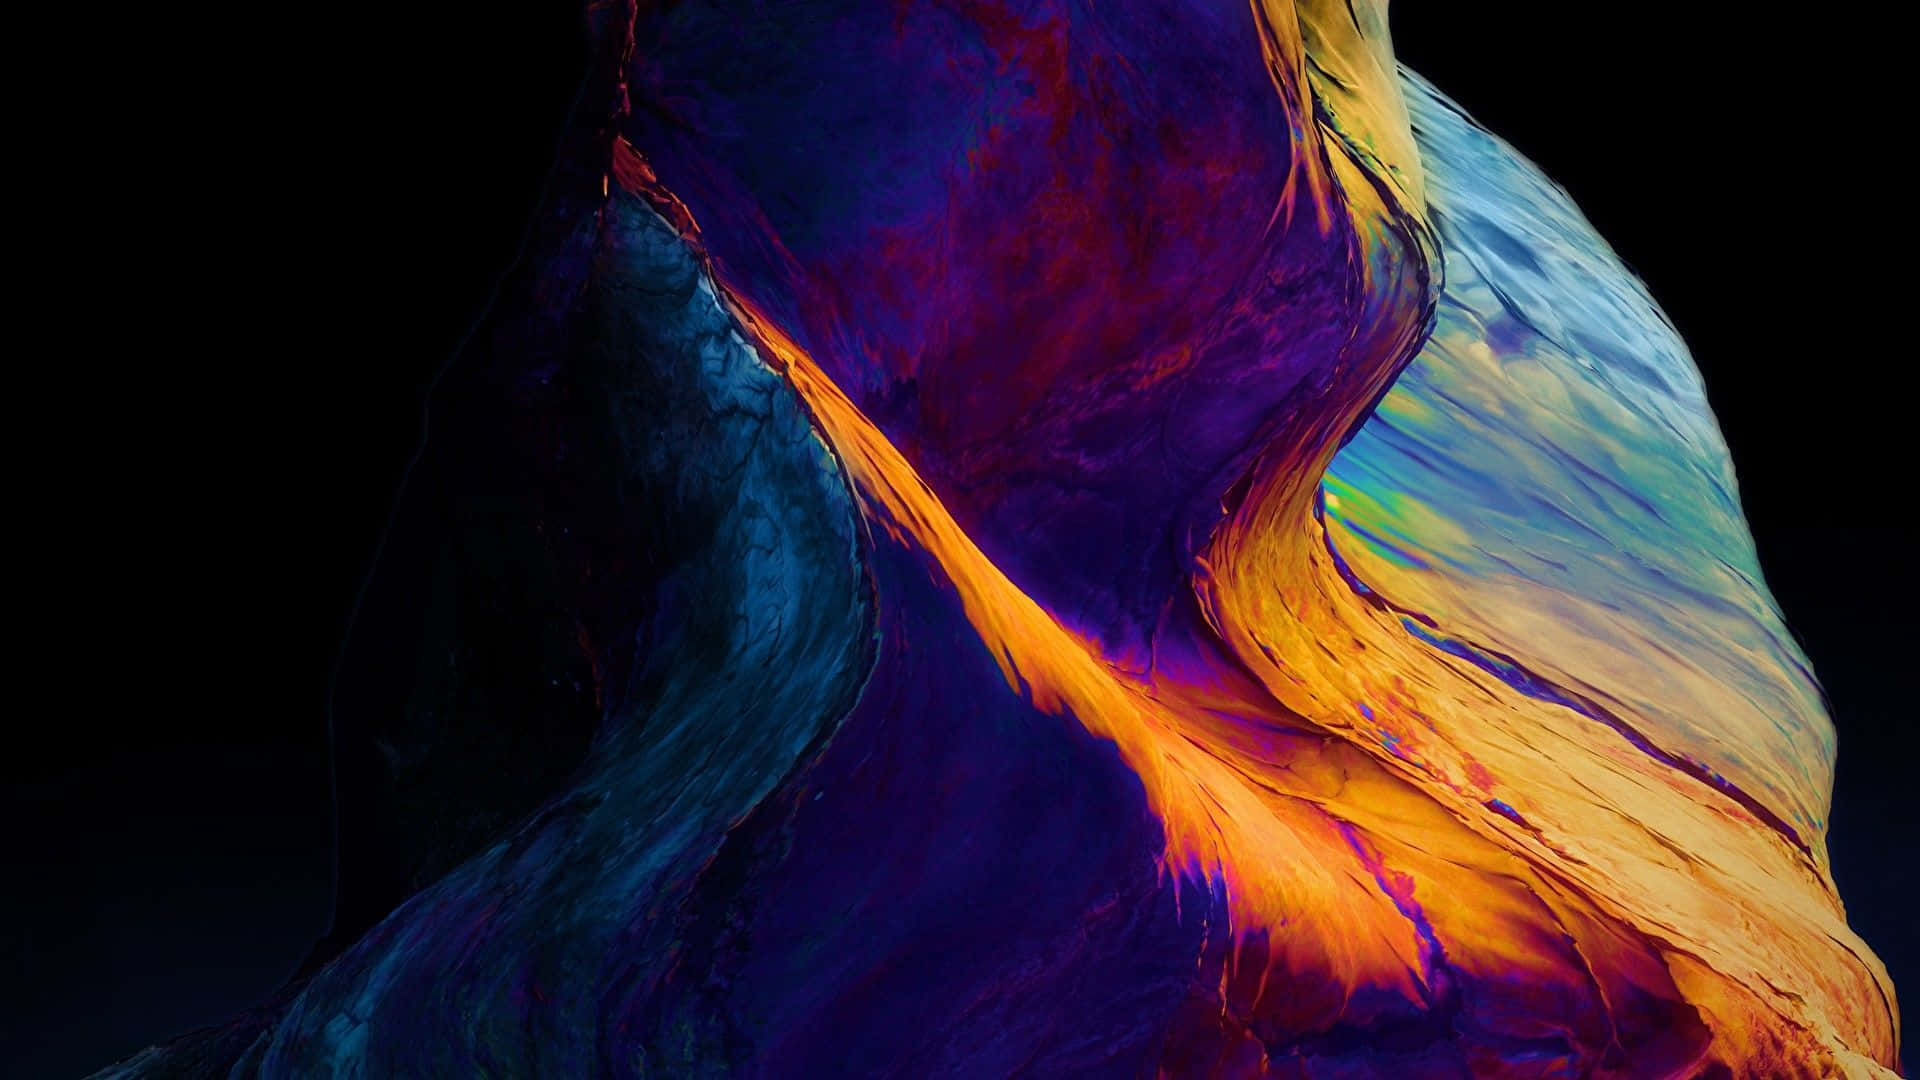 A Colorful Abstract Painting Of A Rock Wallpaper